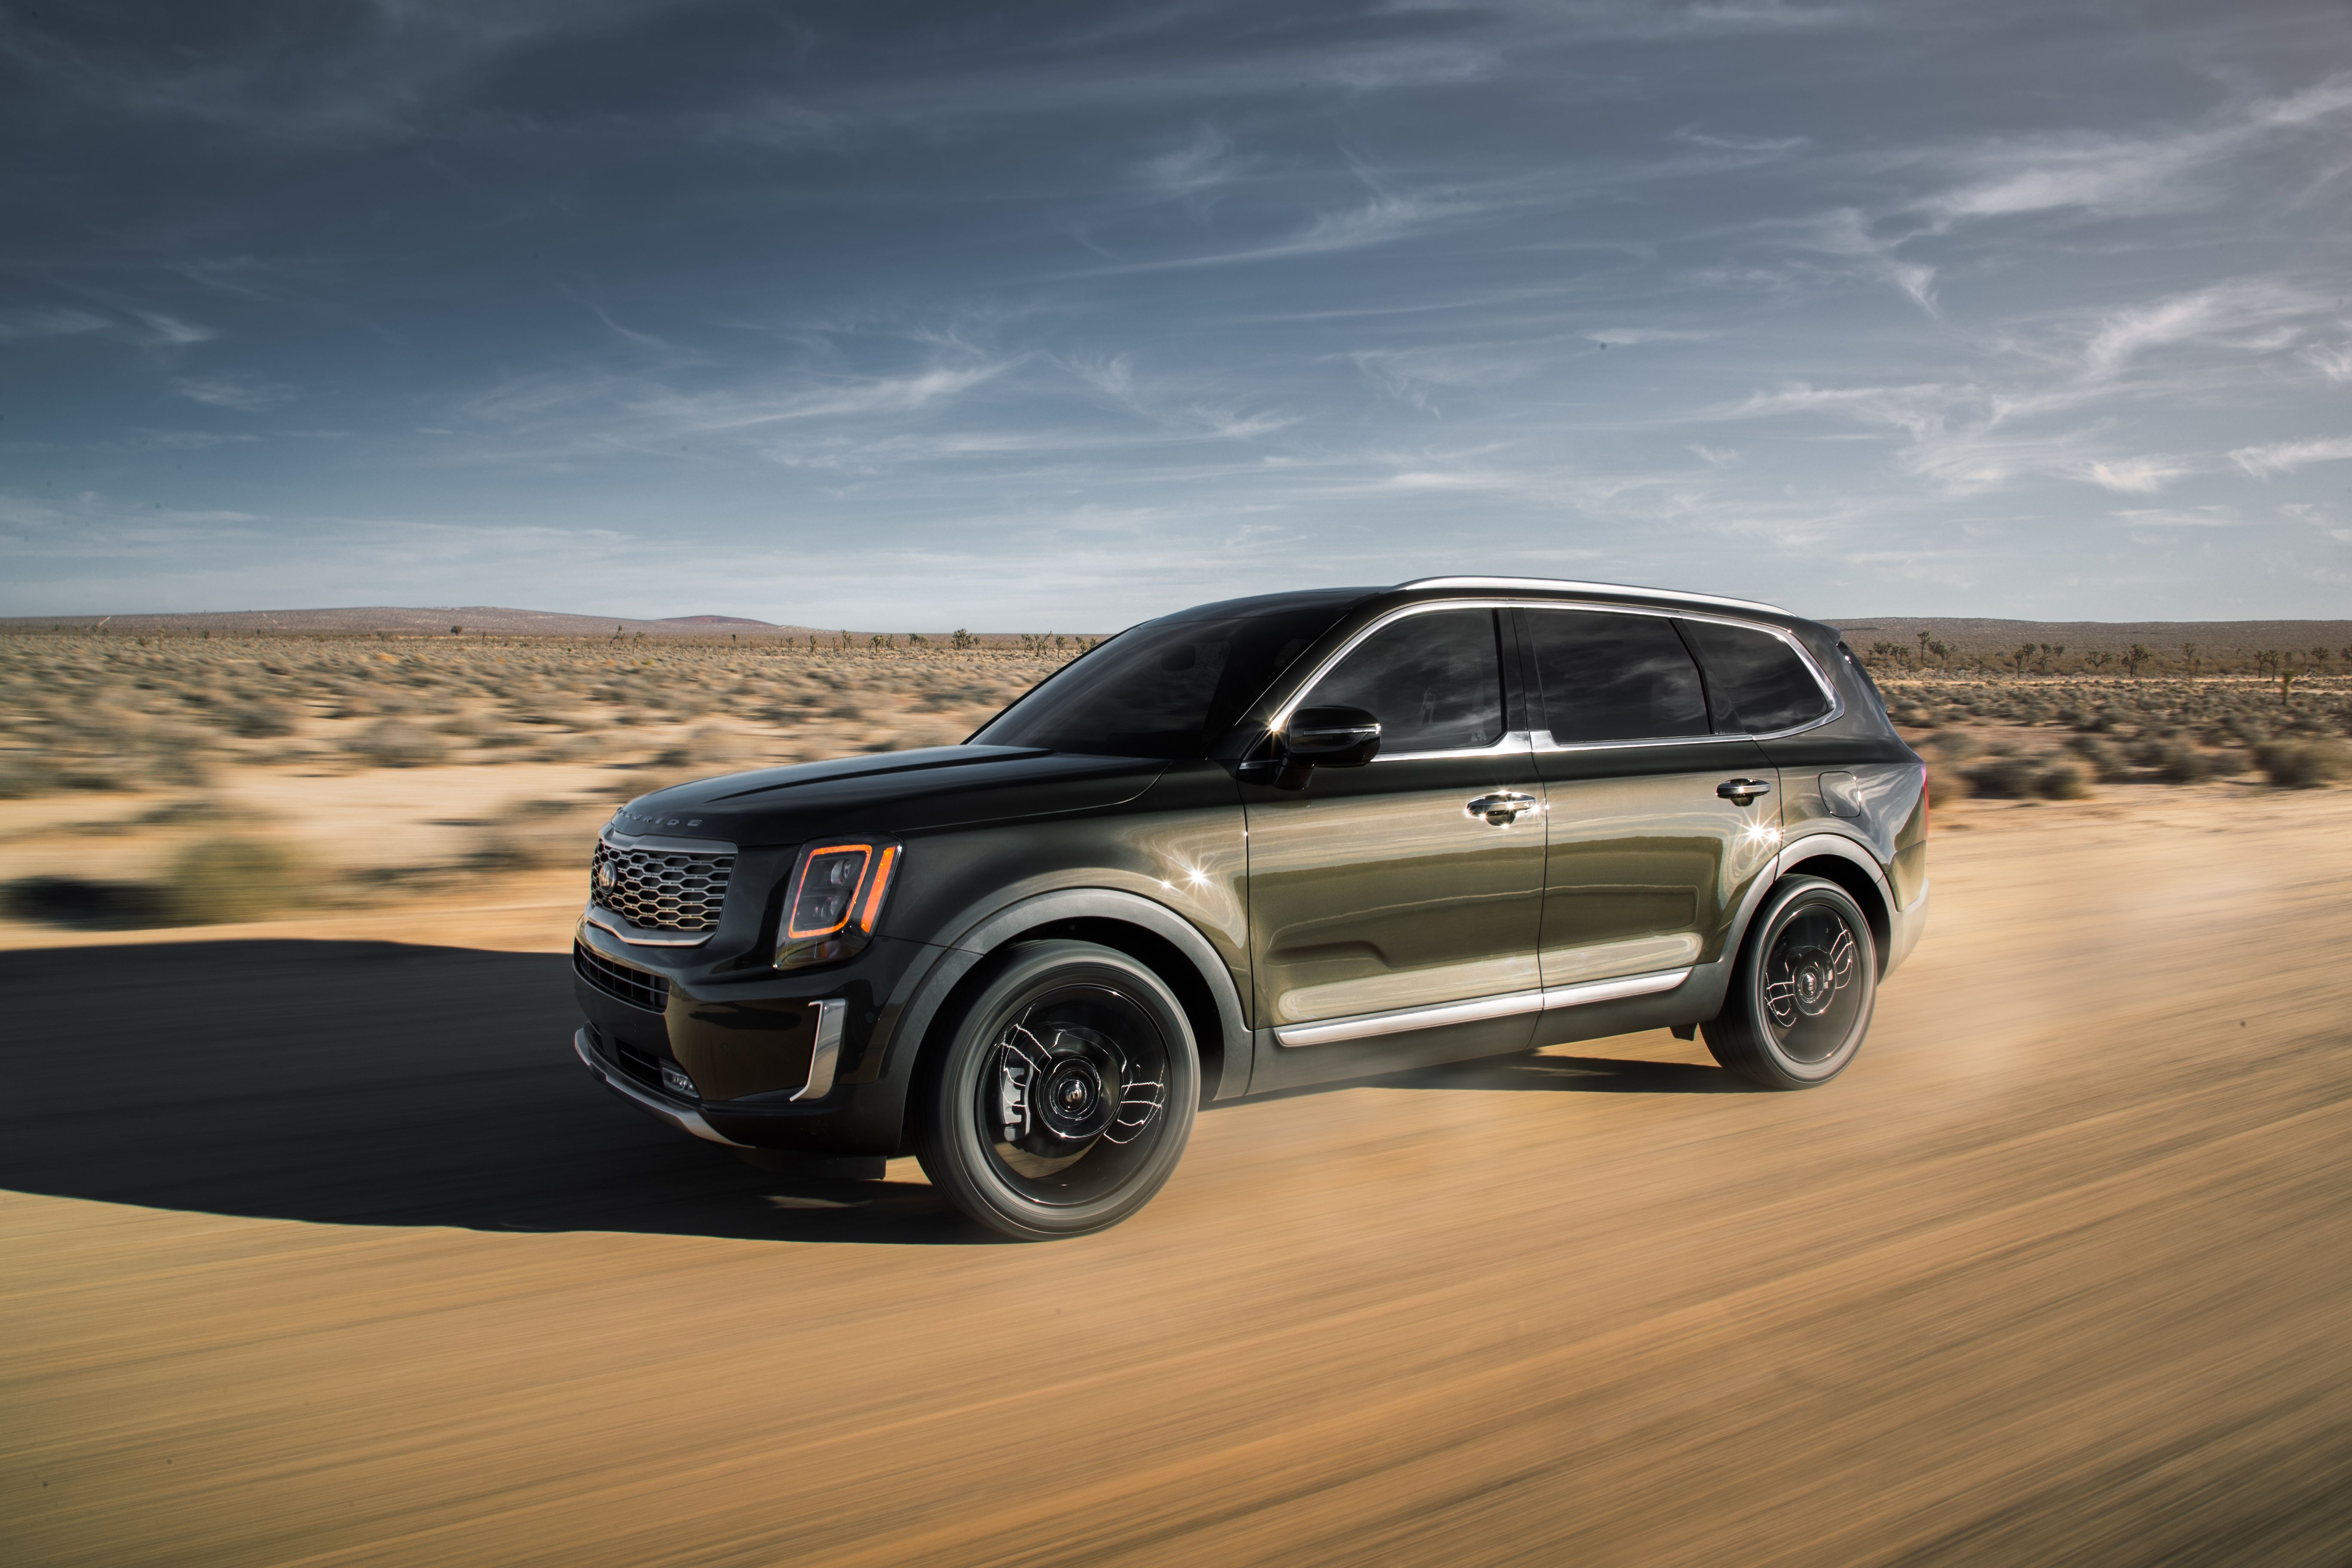 2020 Kia Telluride Is A Nearly Flawless Three Row Suv Review